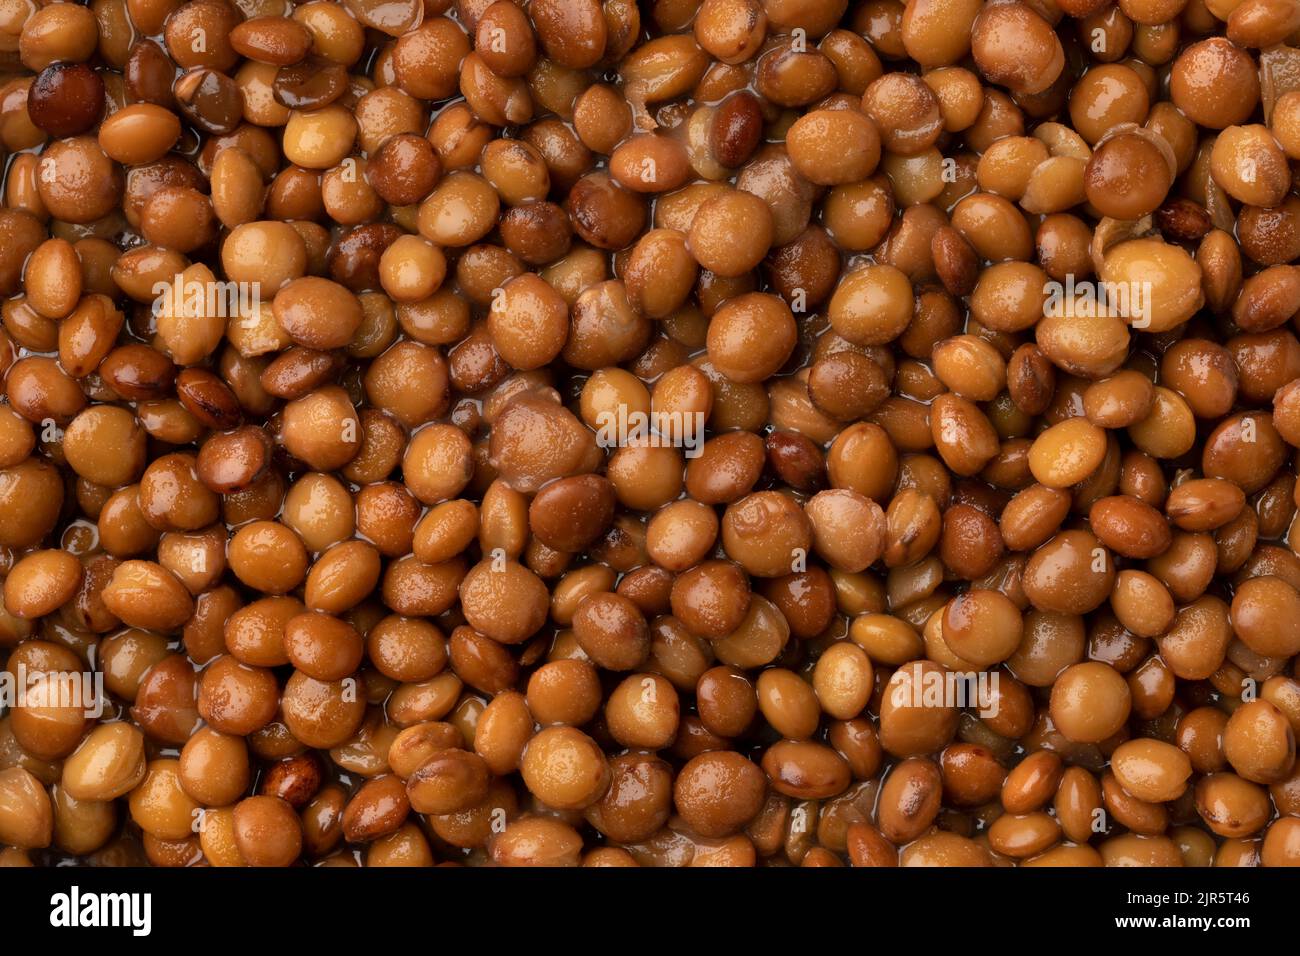 Preserved steamed brown lentils close up full frame as background Stock Photo